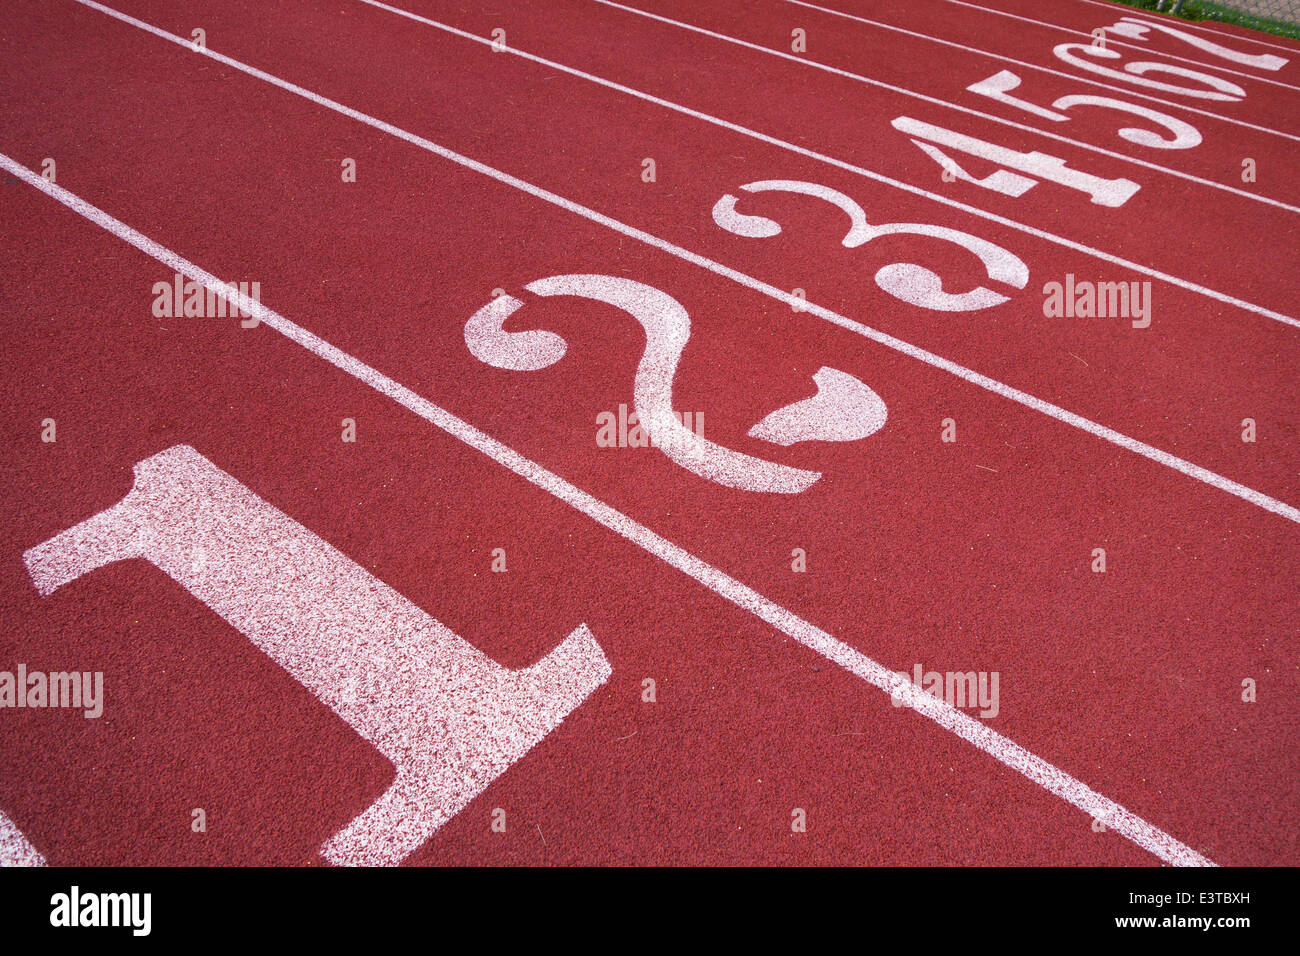 Markings and numbers on a running track, Pittsburgh, PA Stock Photo